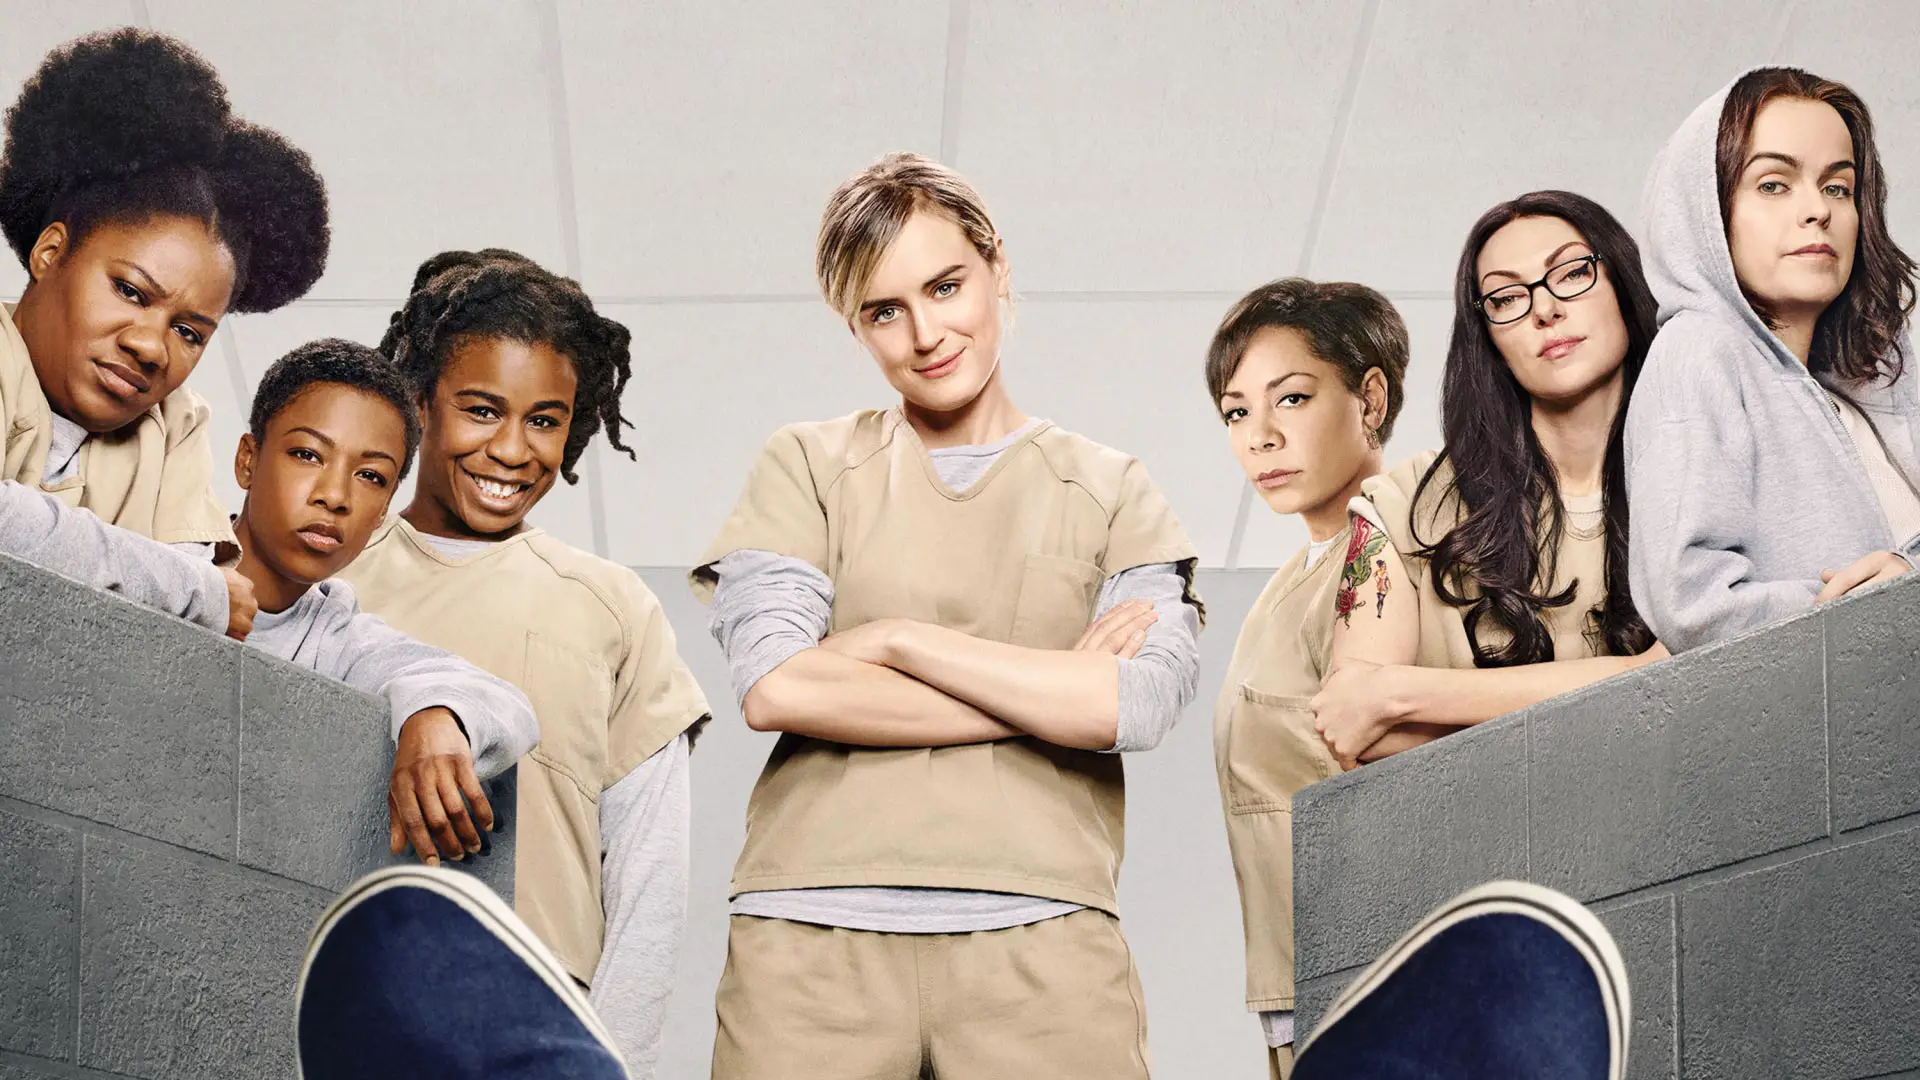 The popular American comedy TV series from Netflix, Orange is the New Black. 